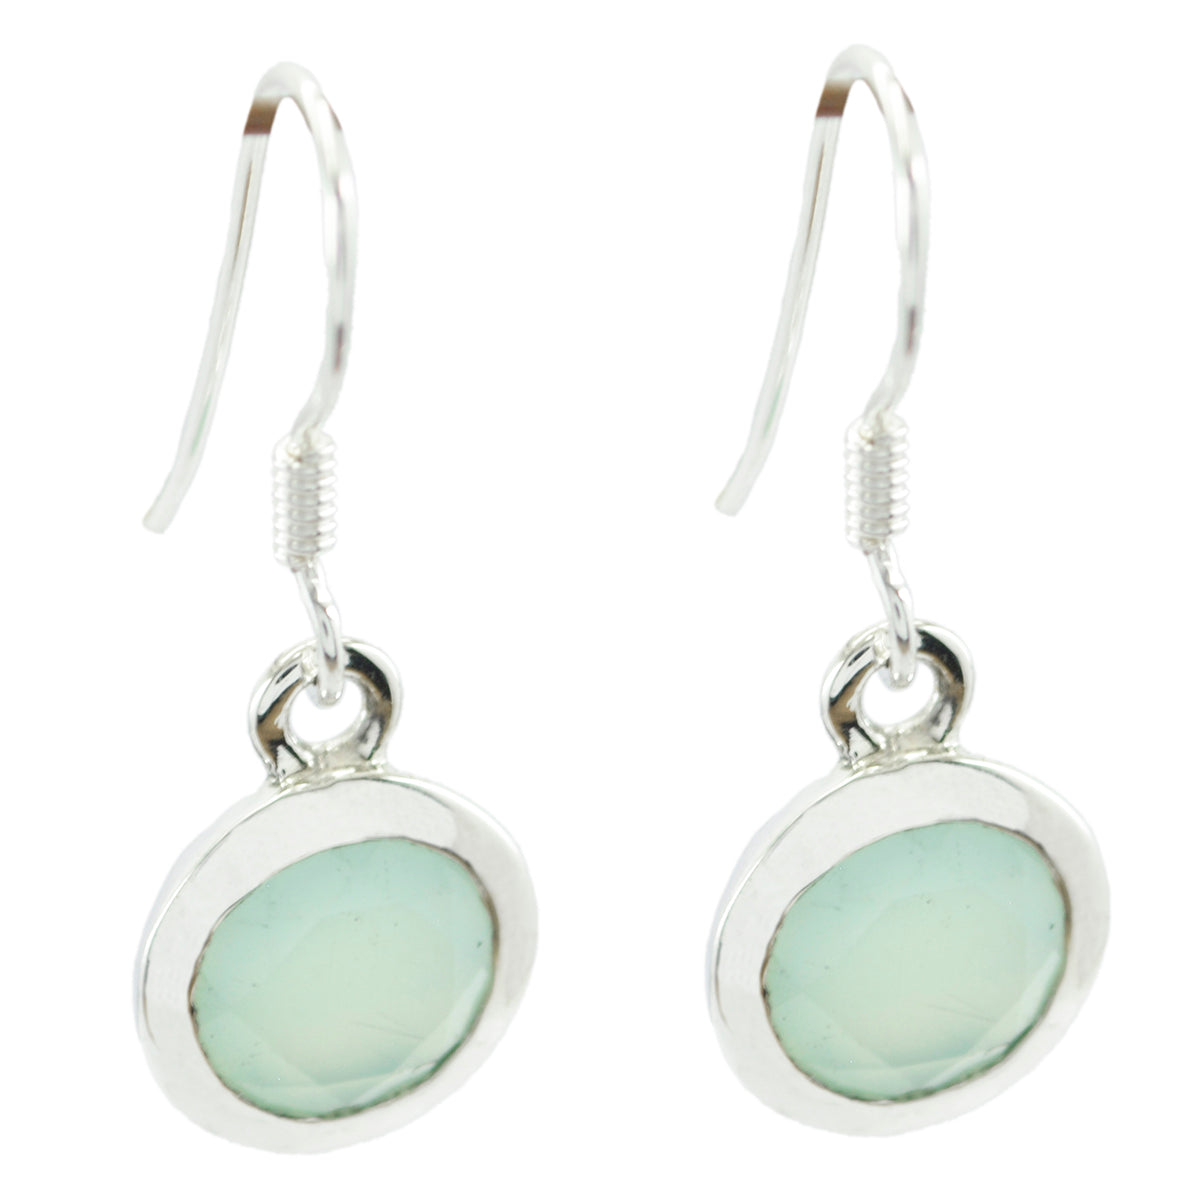 Riyo Natural Gemstone round Faceted Aqua Chalcedoy Silver Earring gift for teacher's day